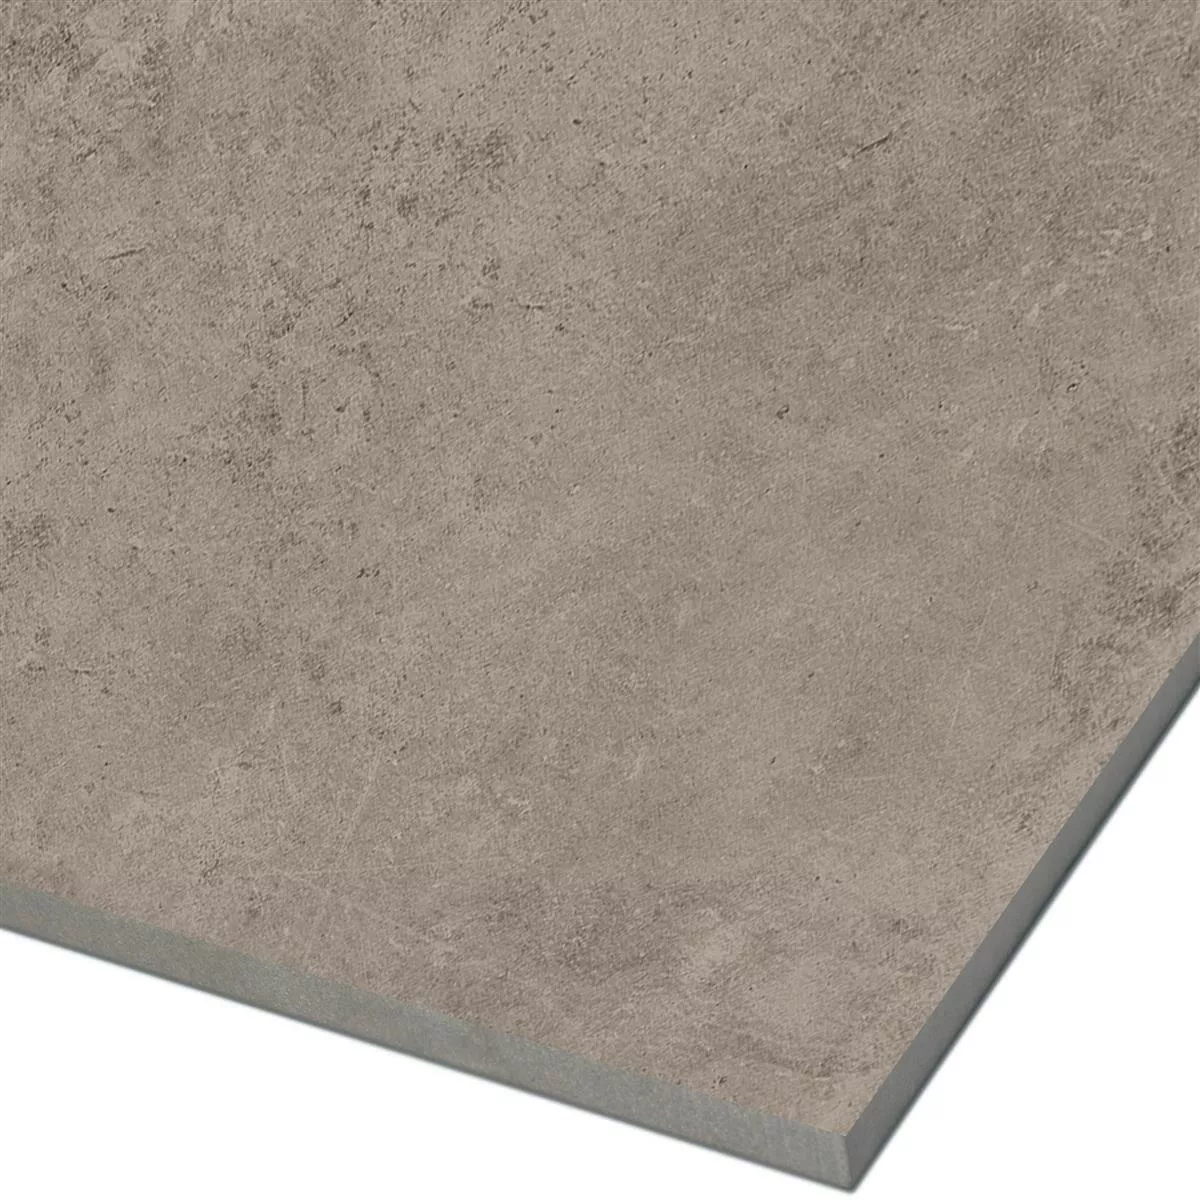 Sample Floor Tiles Colossus Taupe 60x60cm